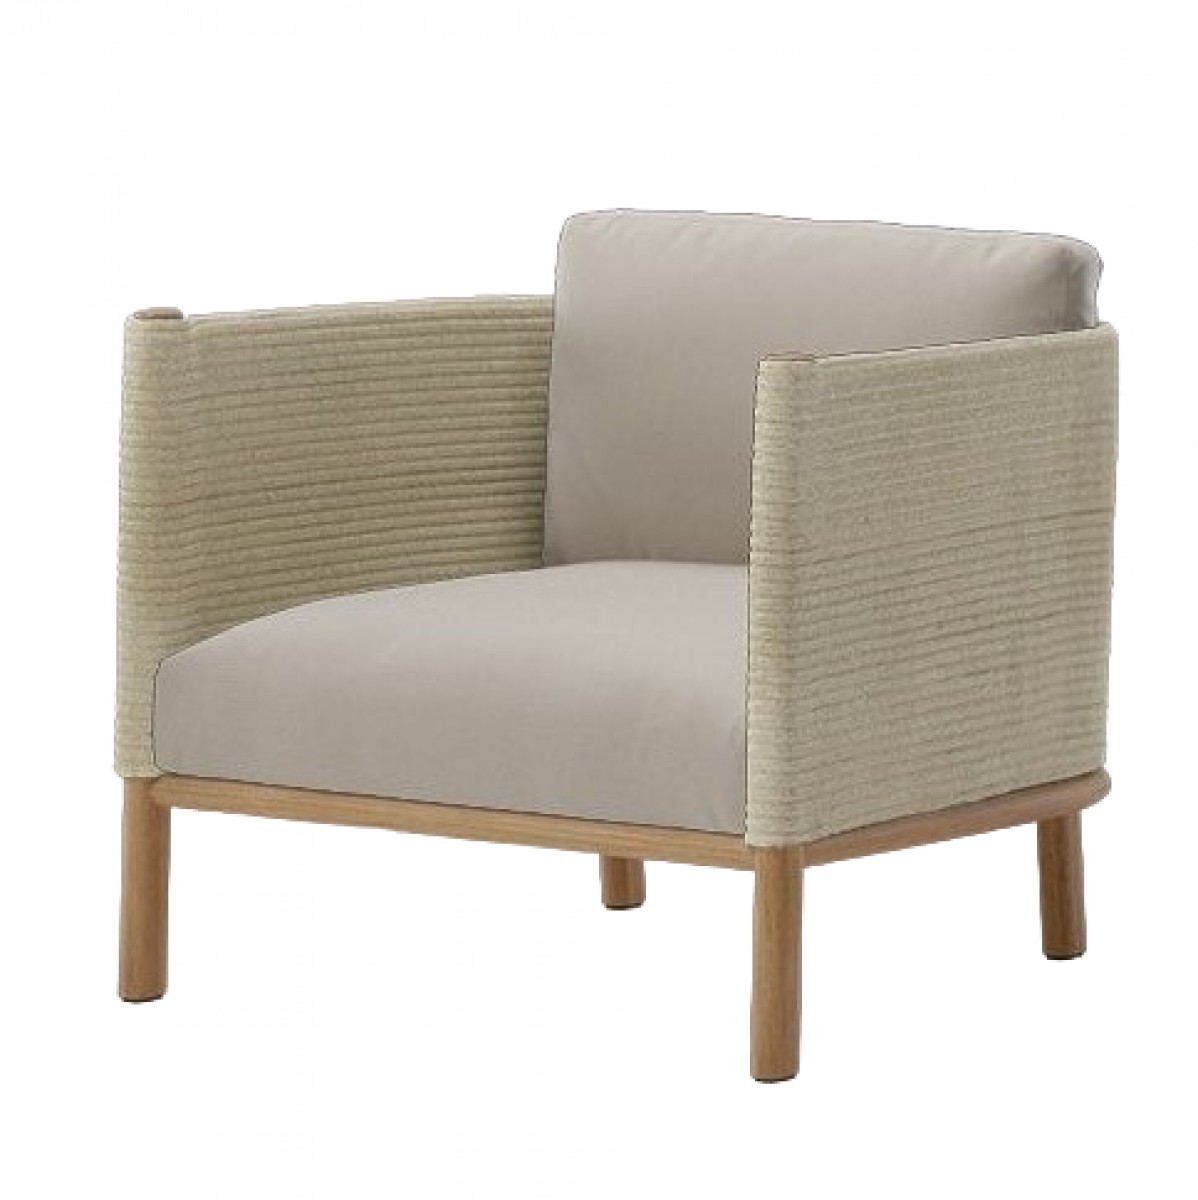 Giro Club Armchair, with Seat and Back Cushions